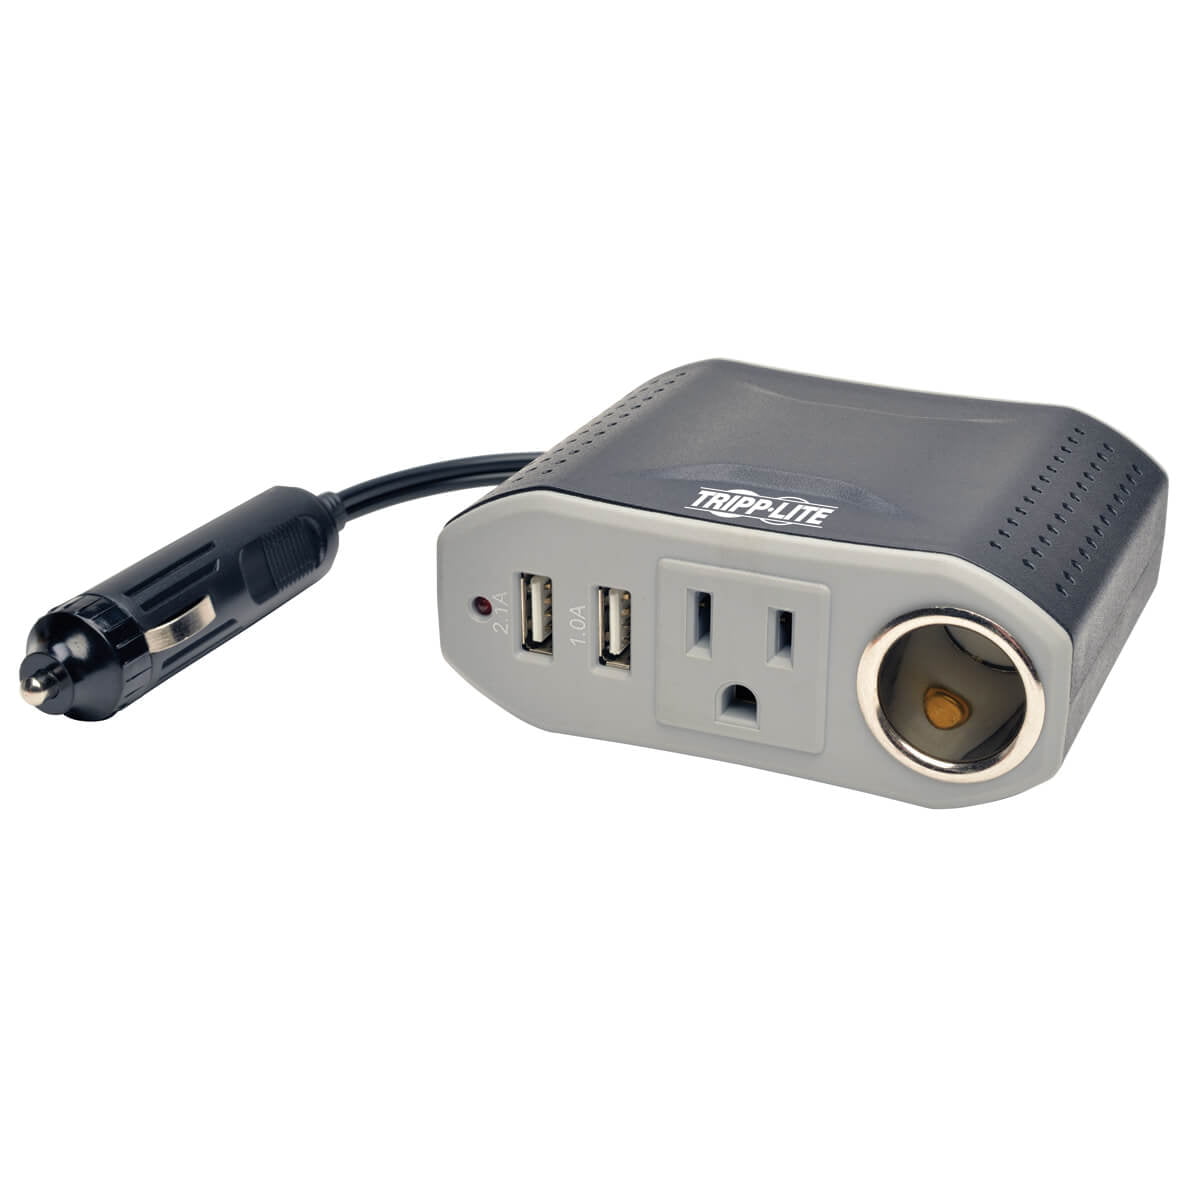 100W Inverter with 12V Power Outlet with LED Work Light RealTree 10033 750A Power Pack 110V